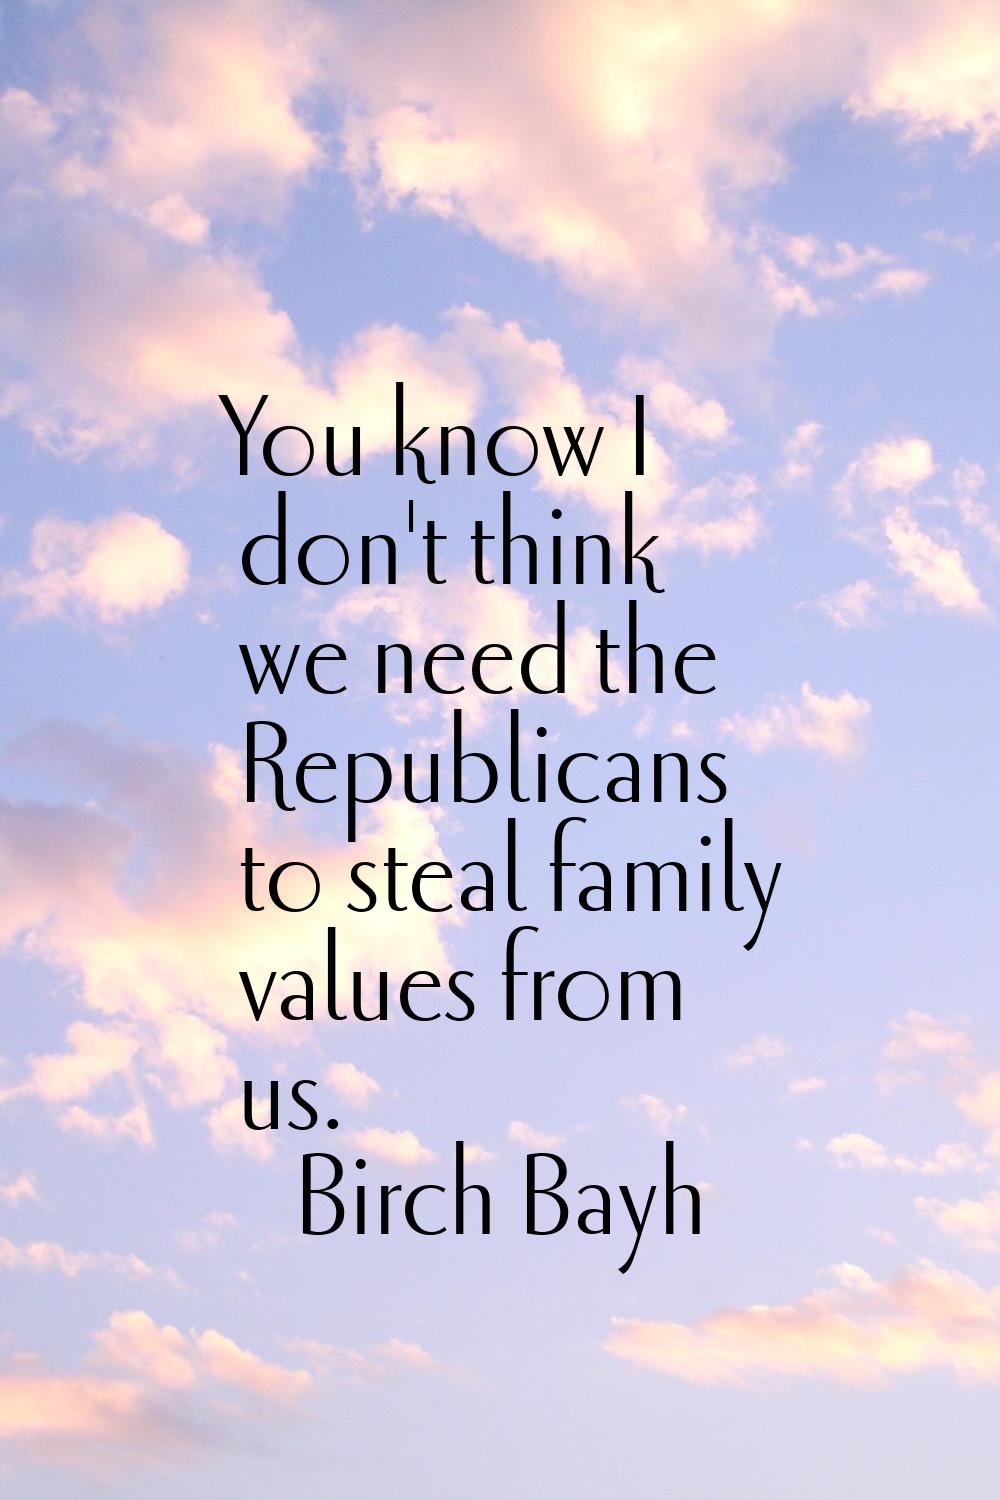 You know I don't think we need the Republicans to steal family values from us.